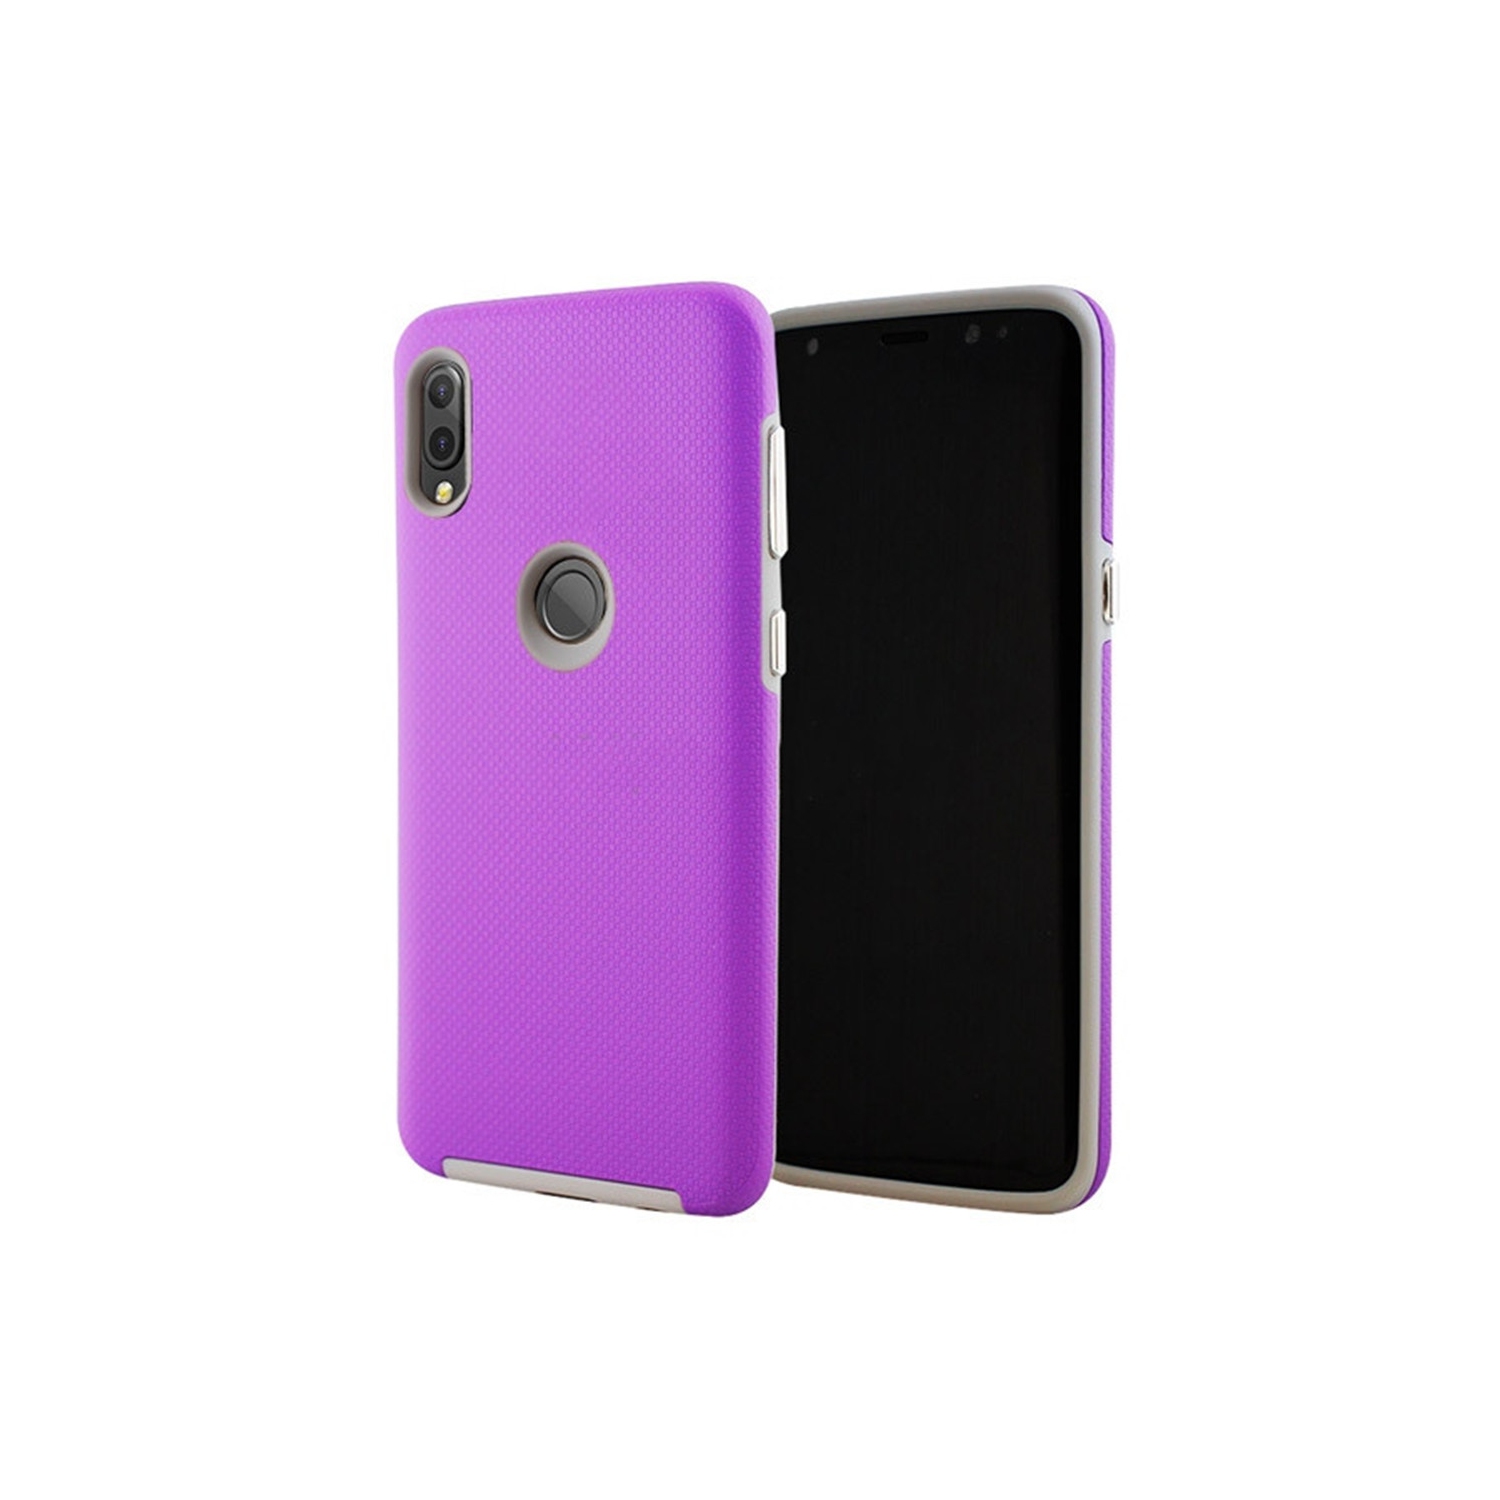 【CSmart】 Slim Fitted Hybrid Hard PC Shell Shockproof Scratch Resistant Case Cover for Samsung Galaxy A20, Purple